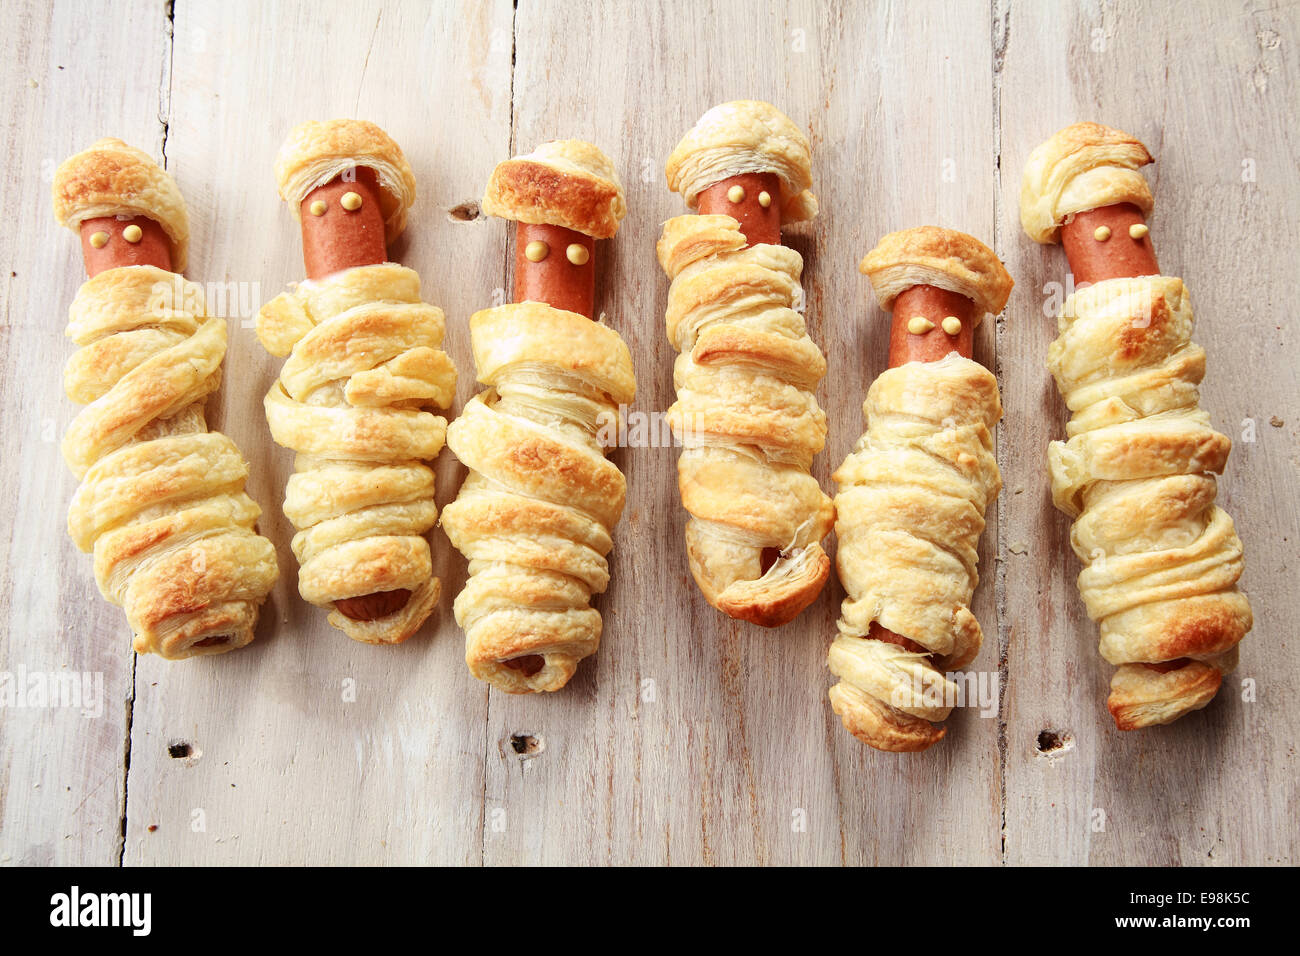 Six Weiners Wrapped in Pastry to Look Like Halloween Mummies on Wooden Background Stock Photo